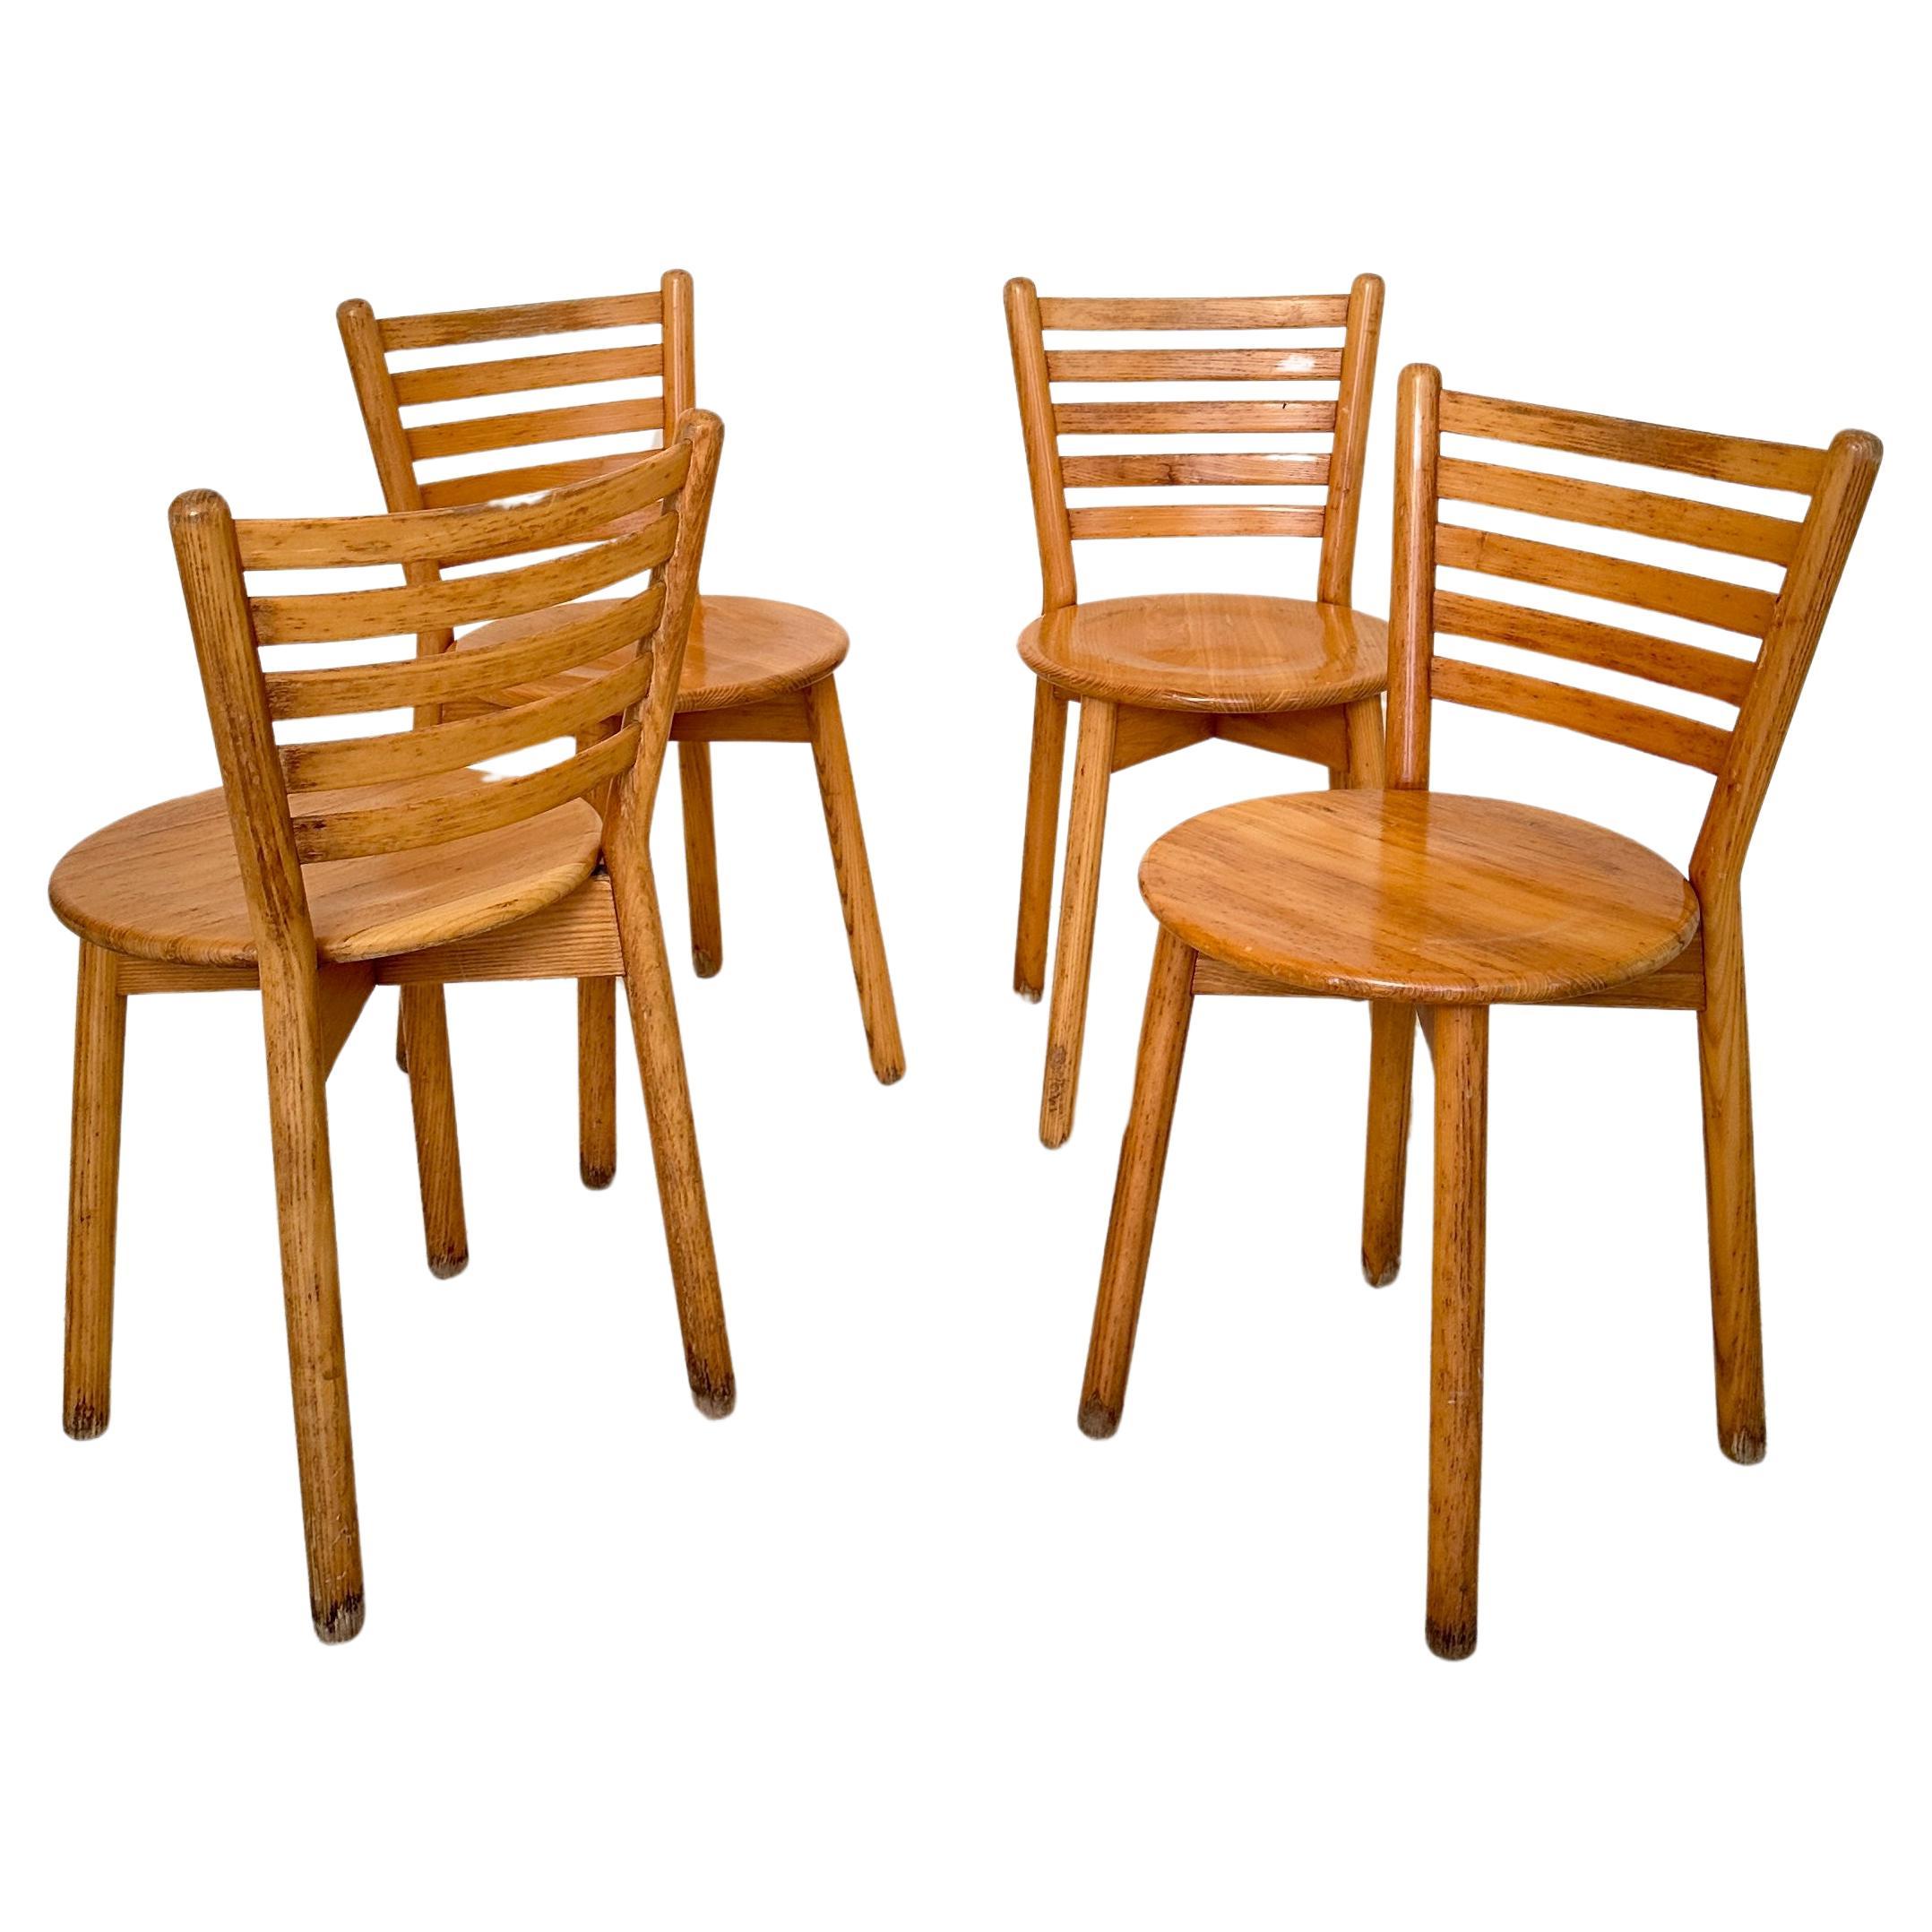 Set of 4 Mid Century Italian Dining Chairs in Solid Elm, around 1960 For Sale